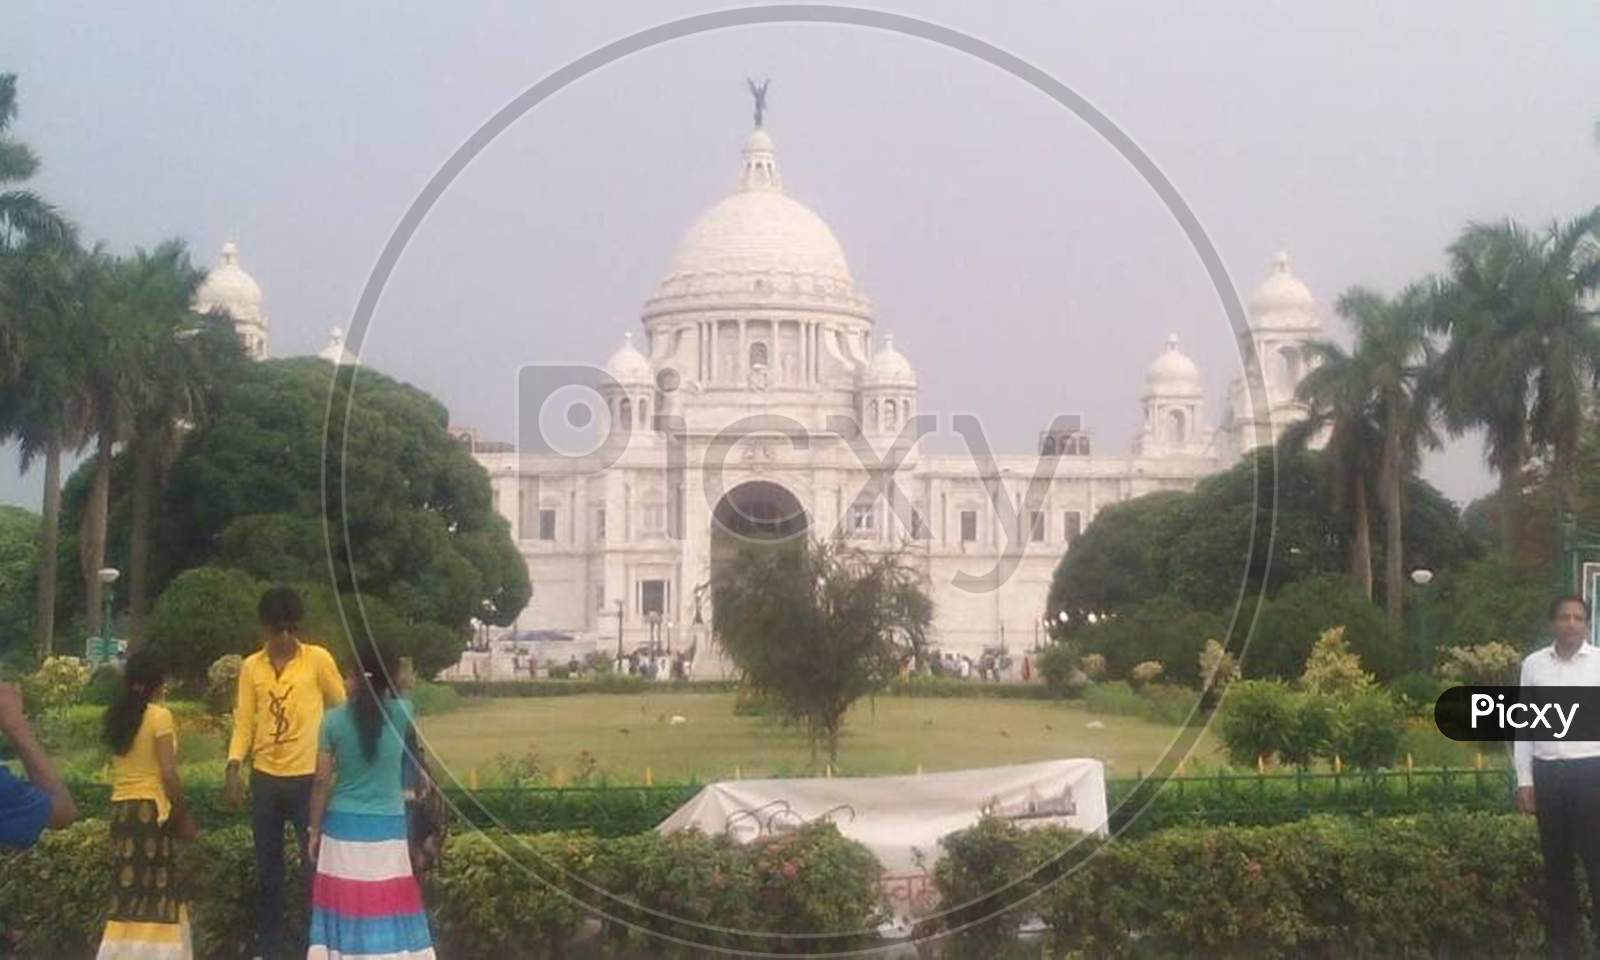 Victoria Memorial at kolkata.Its a Editorial Photo don't use it as a commercial photo.